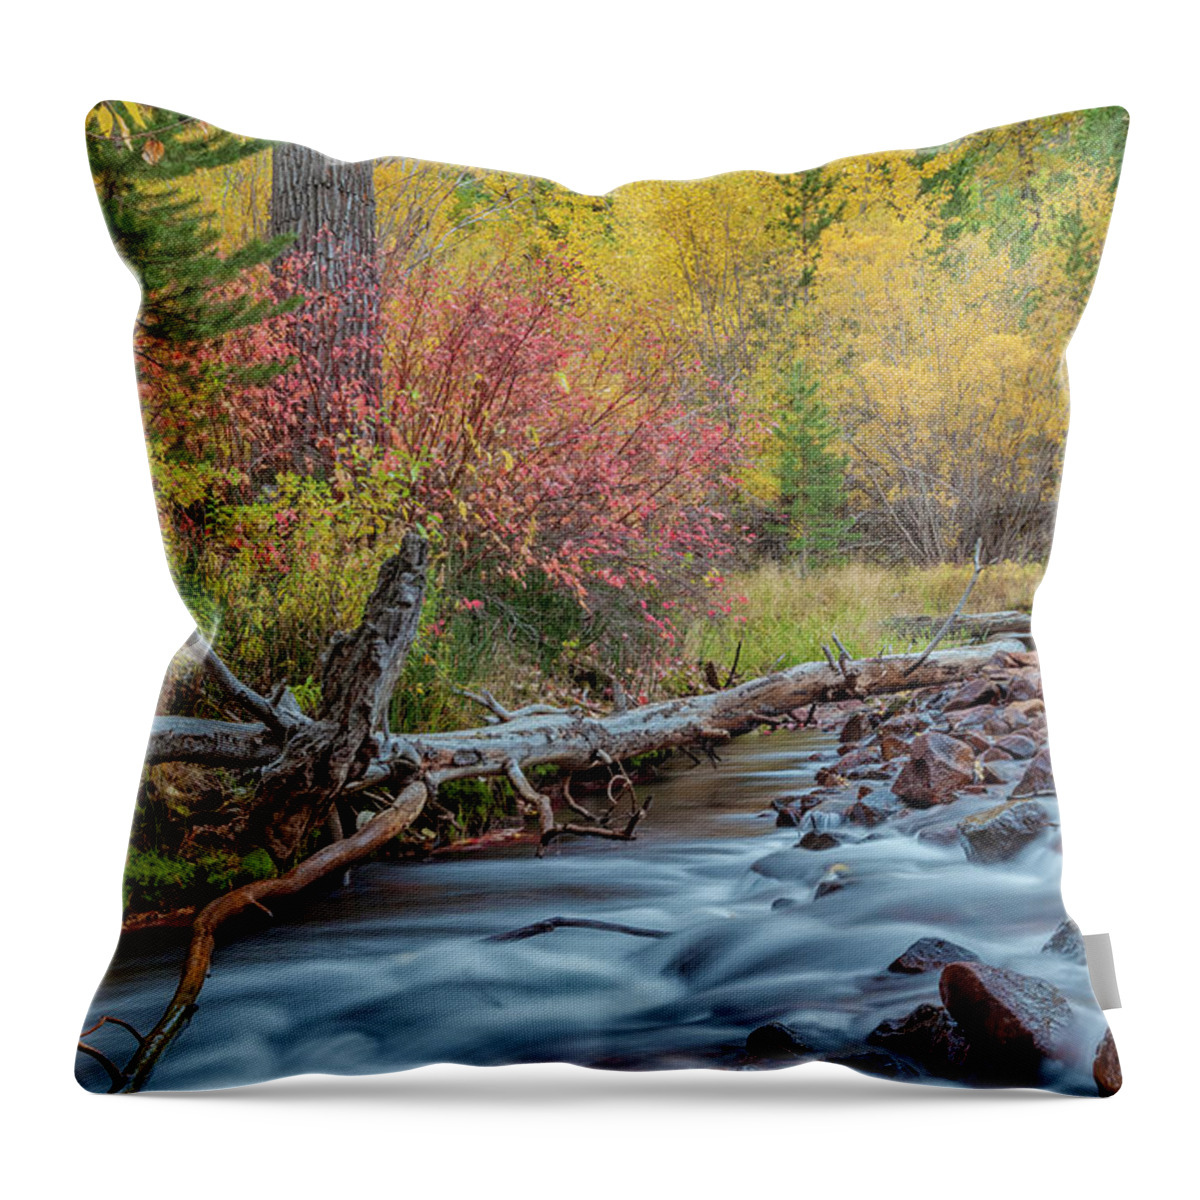 Fall Throw Pillow featuring the photograph The Sierra Autumn by Jonathan Nguyen